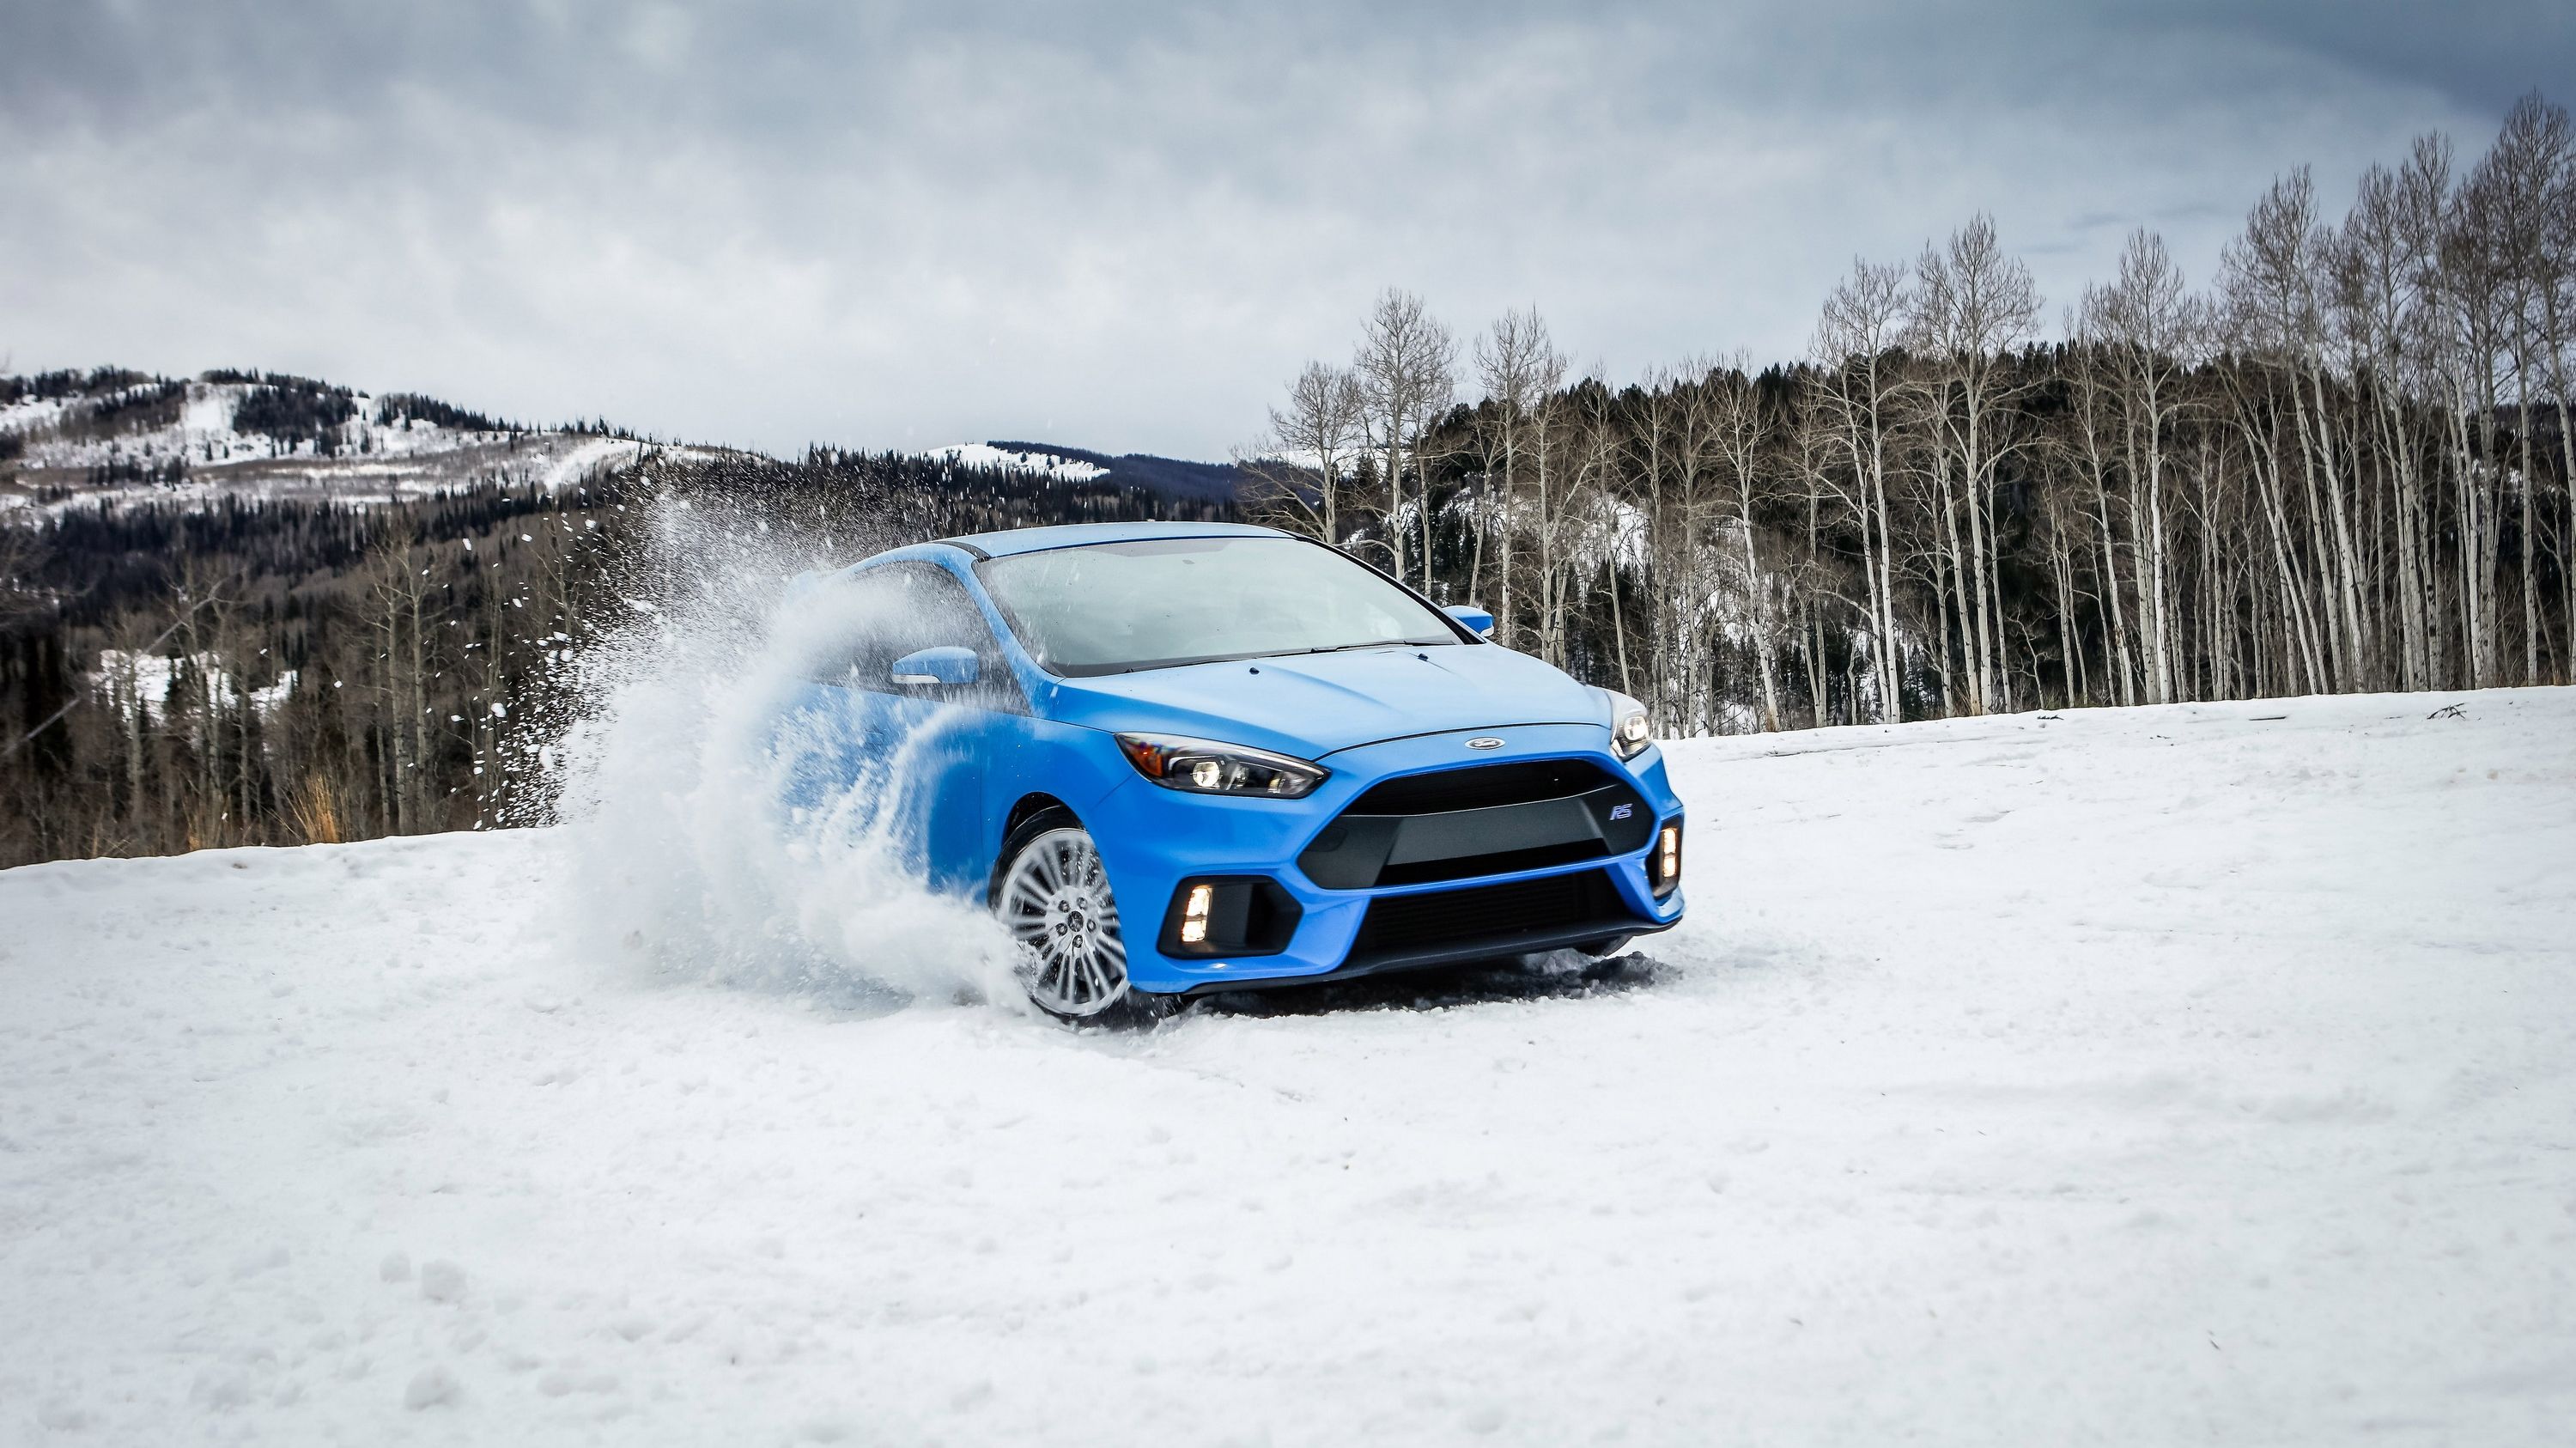 2016 Focus RS Drift Mode Created By Accident And We’re All Better For It